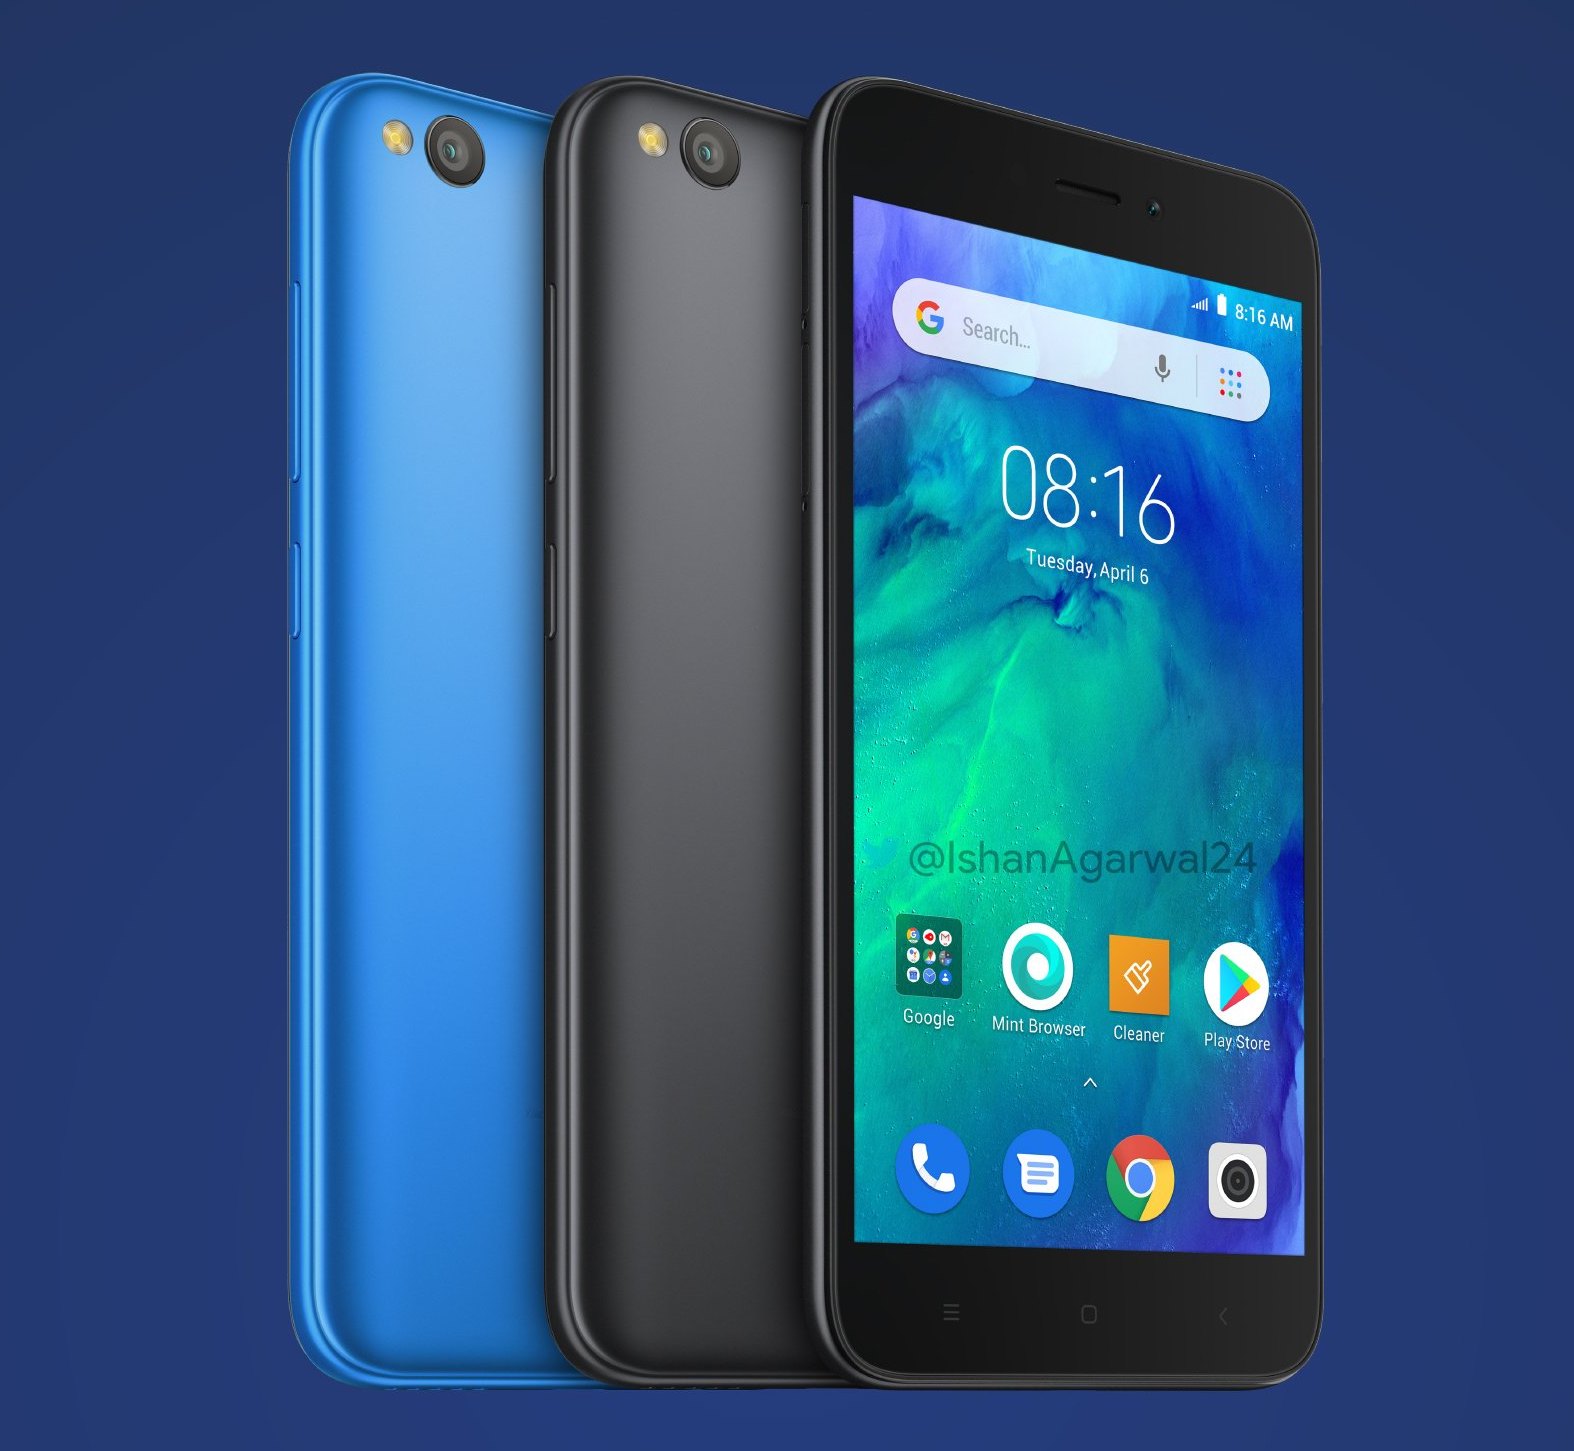 Xiaomi is introducing an ultra-budget Redmi smartphone that runs on ...